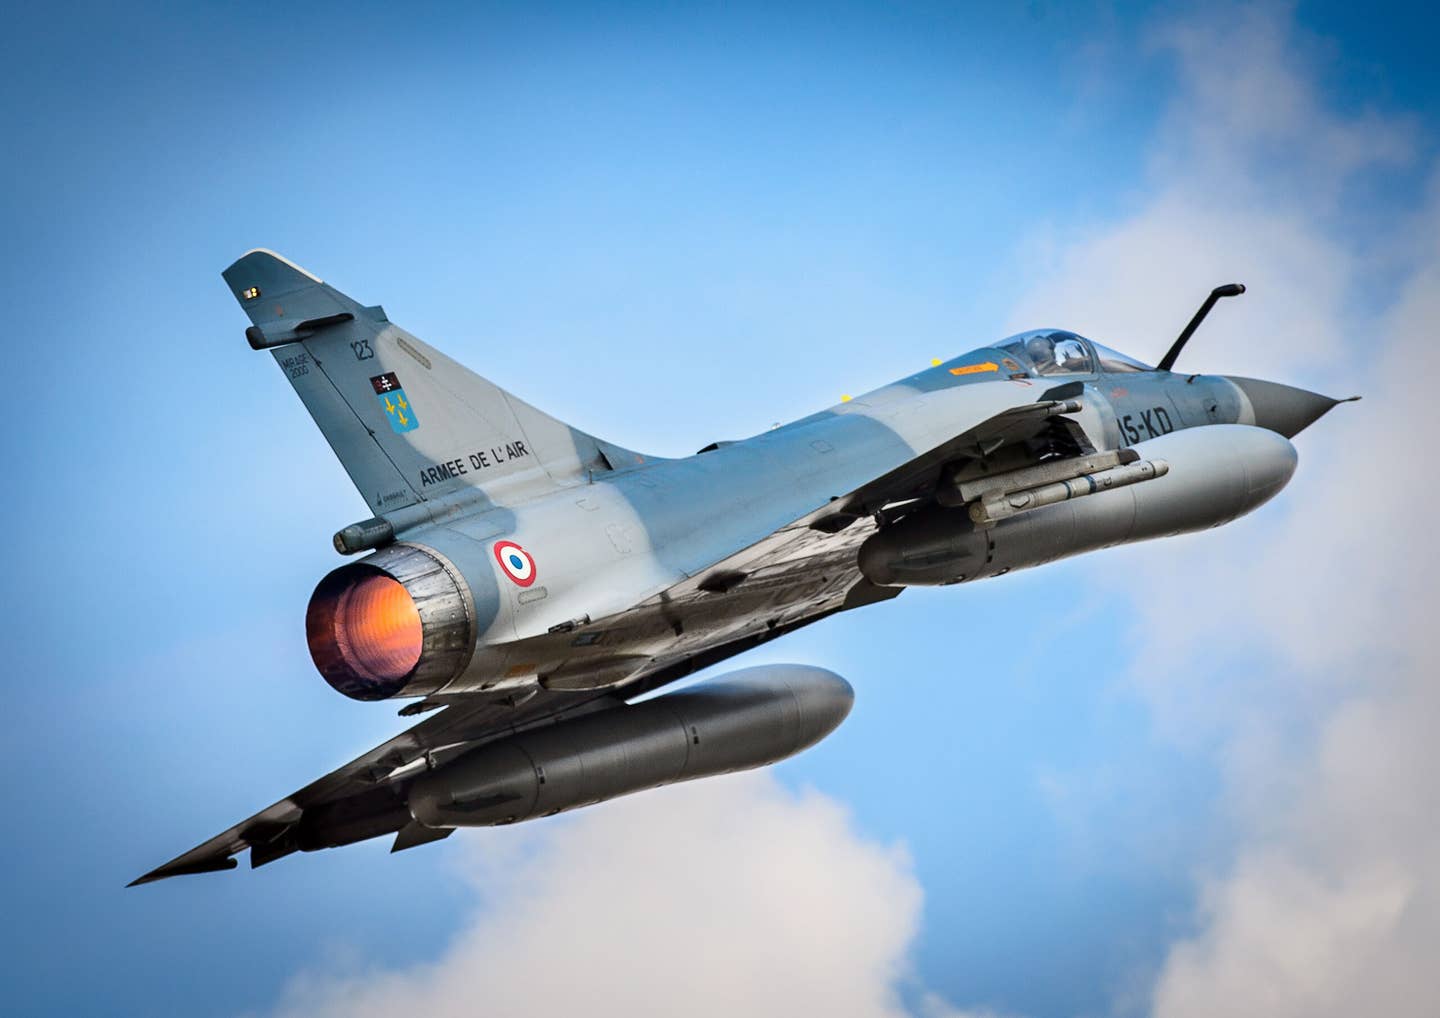 A Mirage 2000C blasts off from RAF Brize Norton in England in September 2014, ahead of a NATO Summit flypast. <em>Paul Crouch/RAF Brize Norton Photographic Section</em>